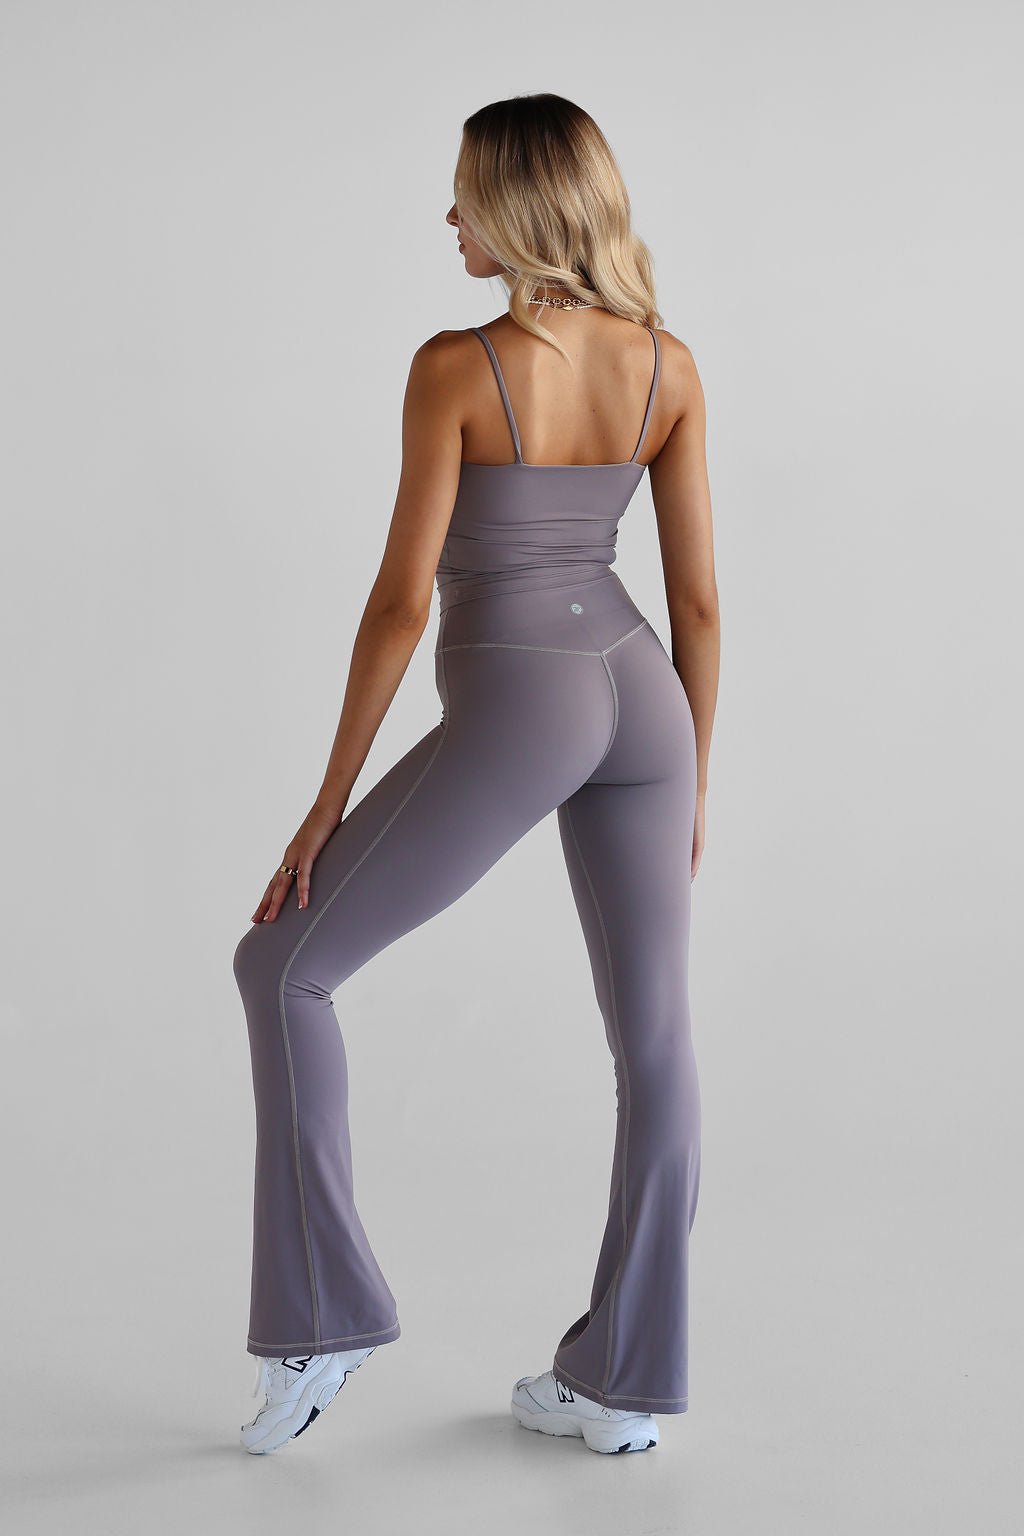 SCULPT Flare Leggings - Charcoal, High Waisted, Squat Proof, 5 Star Rated